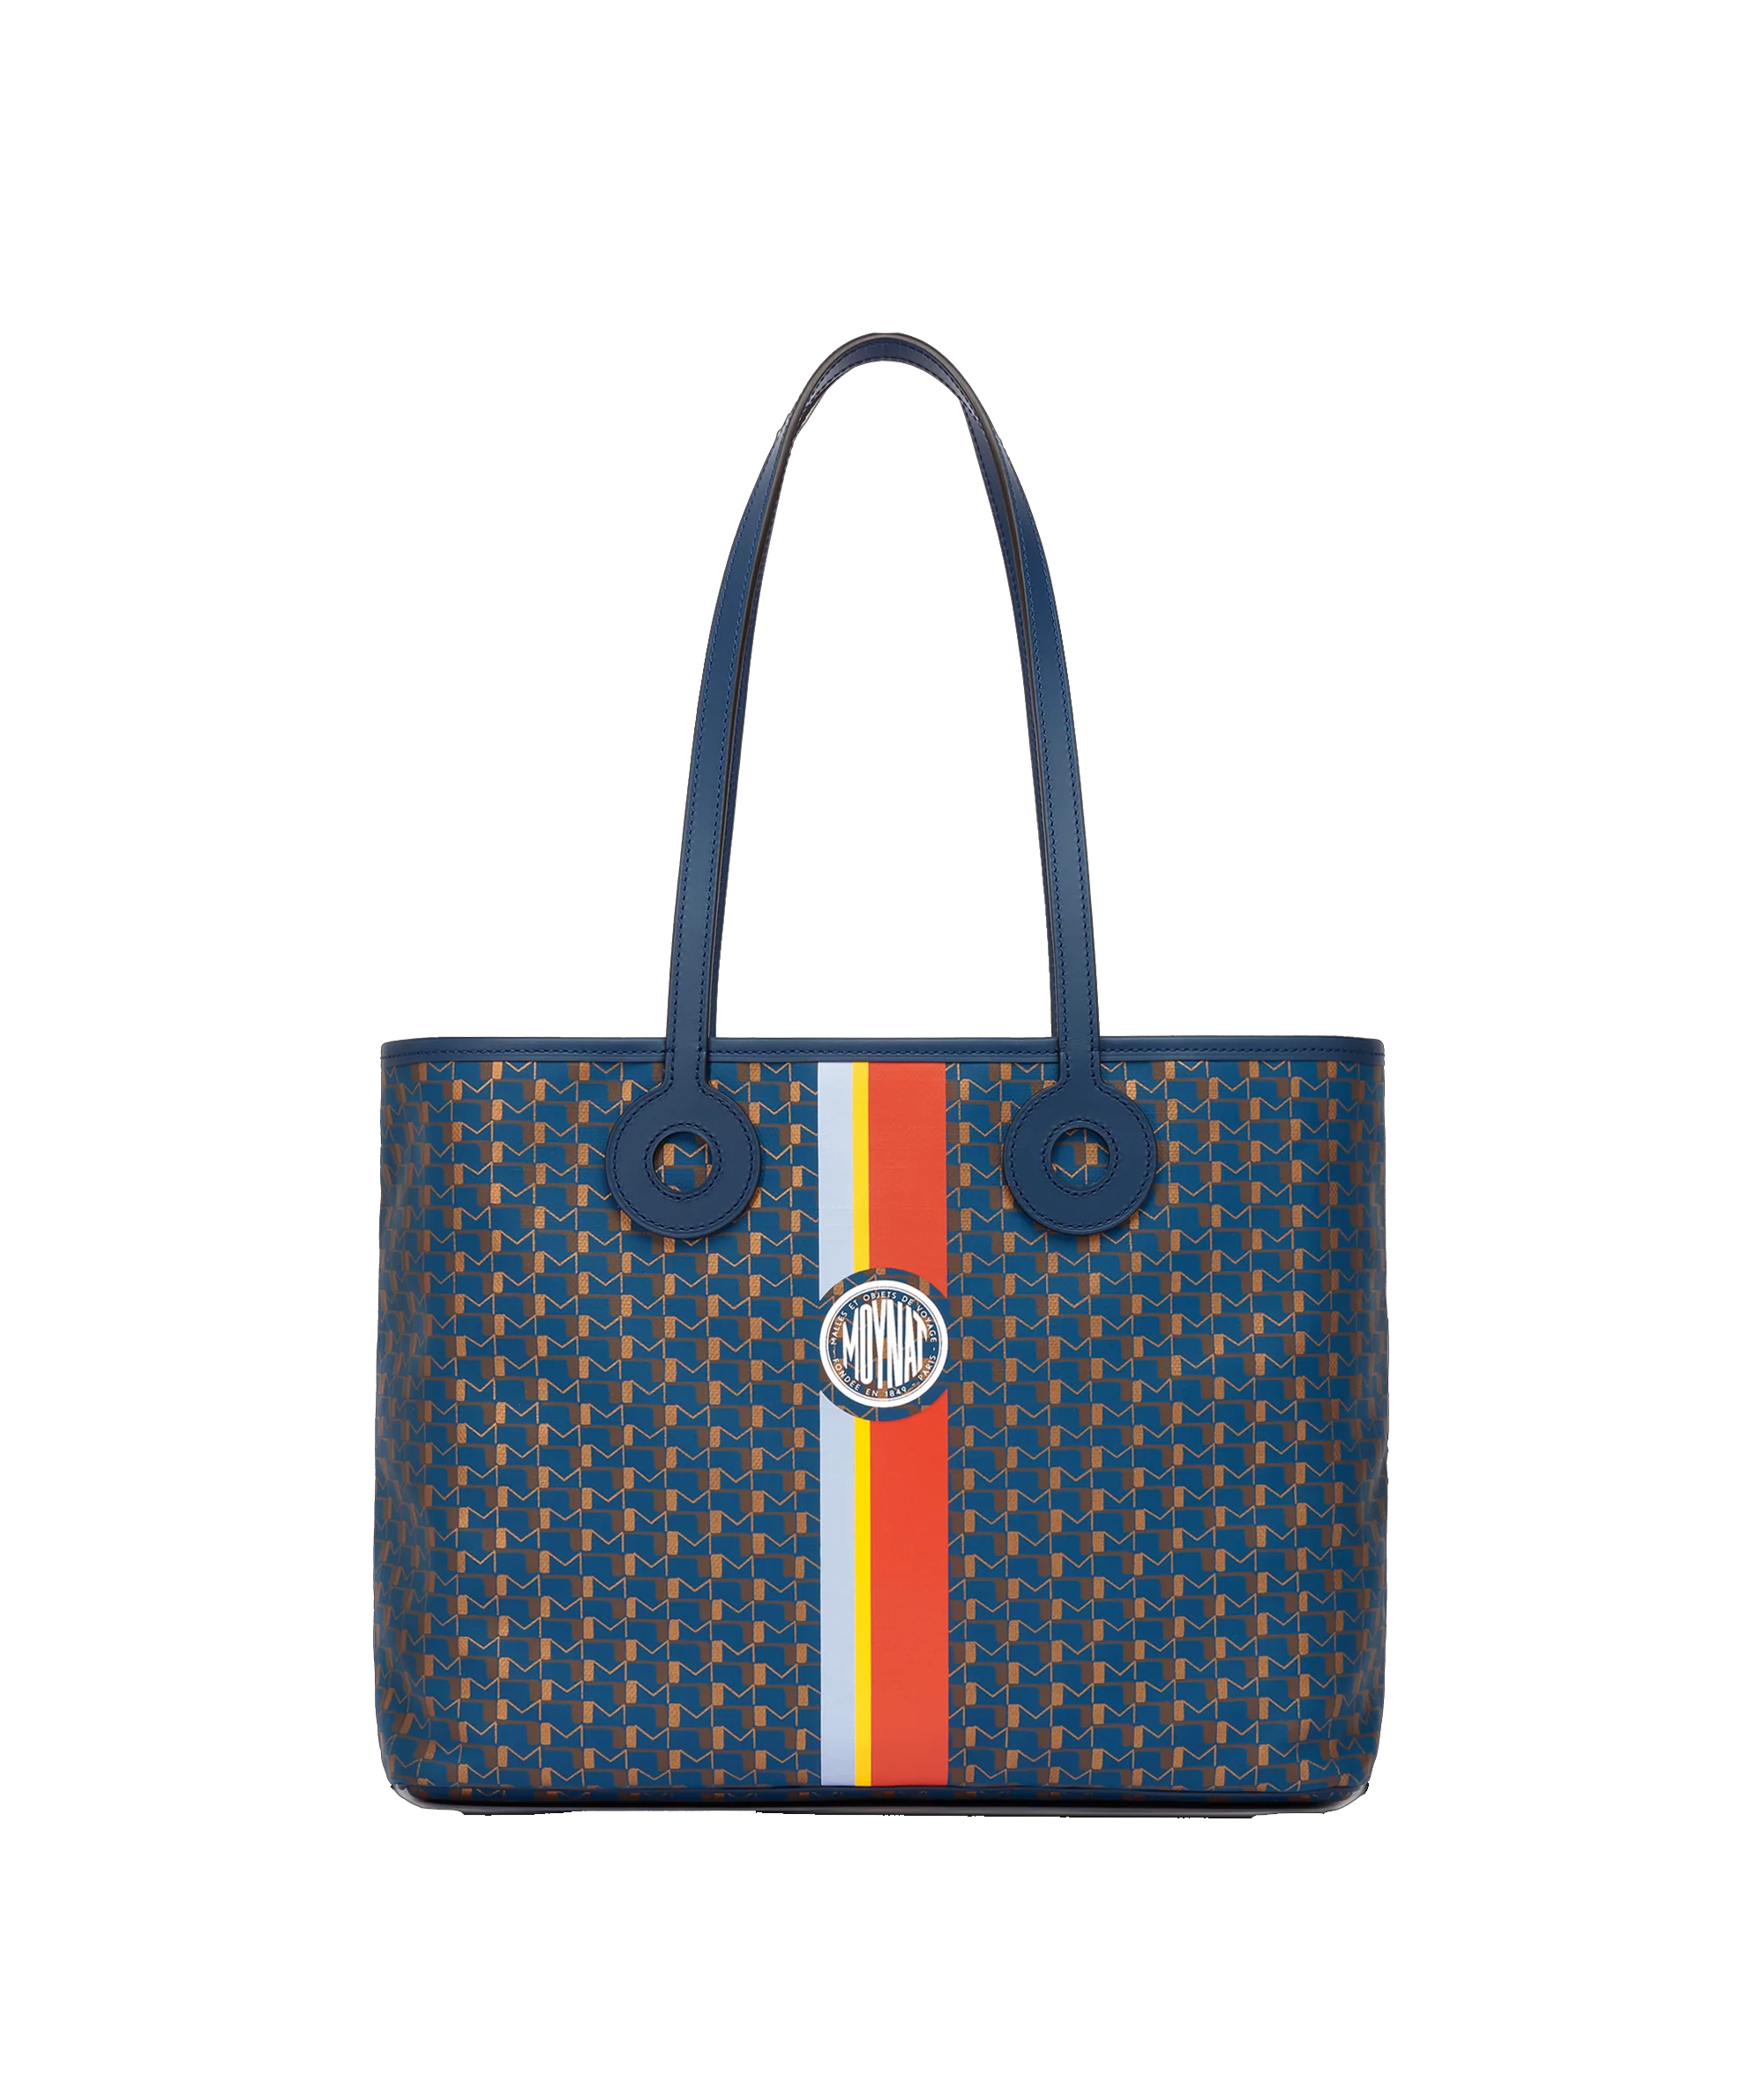 So unrated yet one of the best heritage brand out there @moynat, Goyard